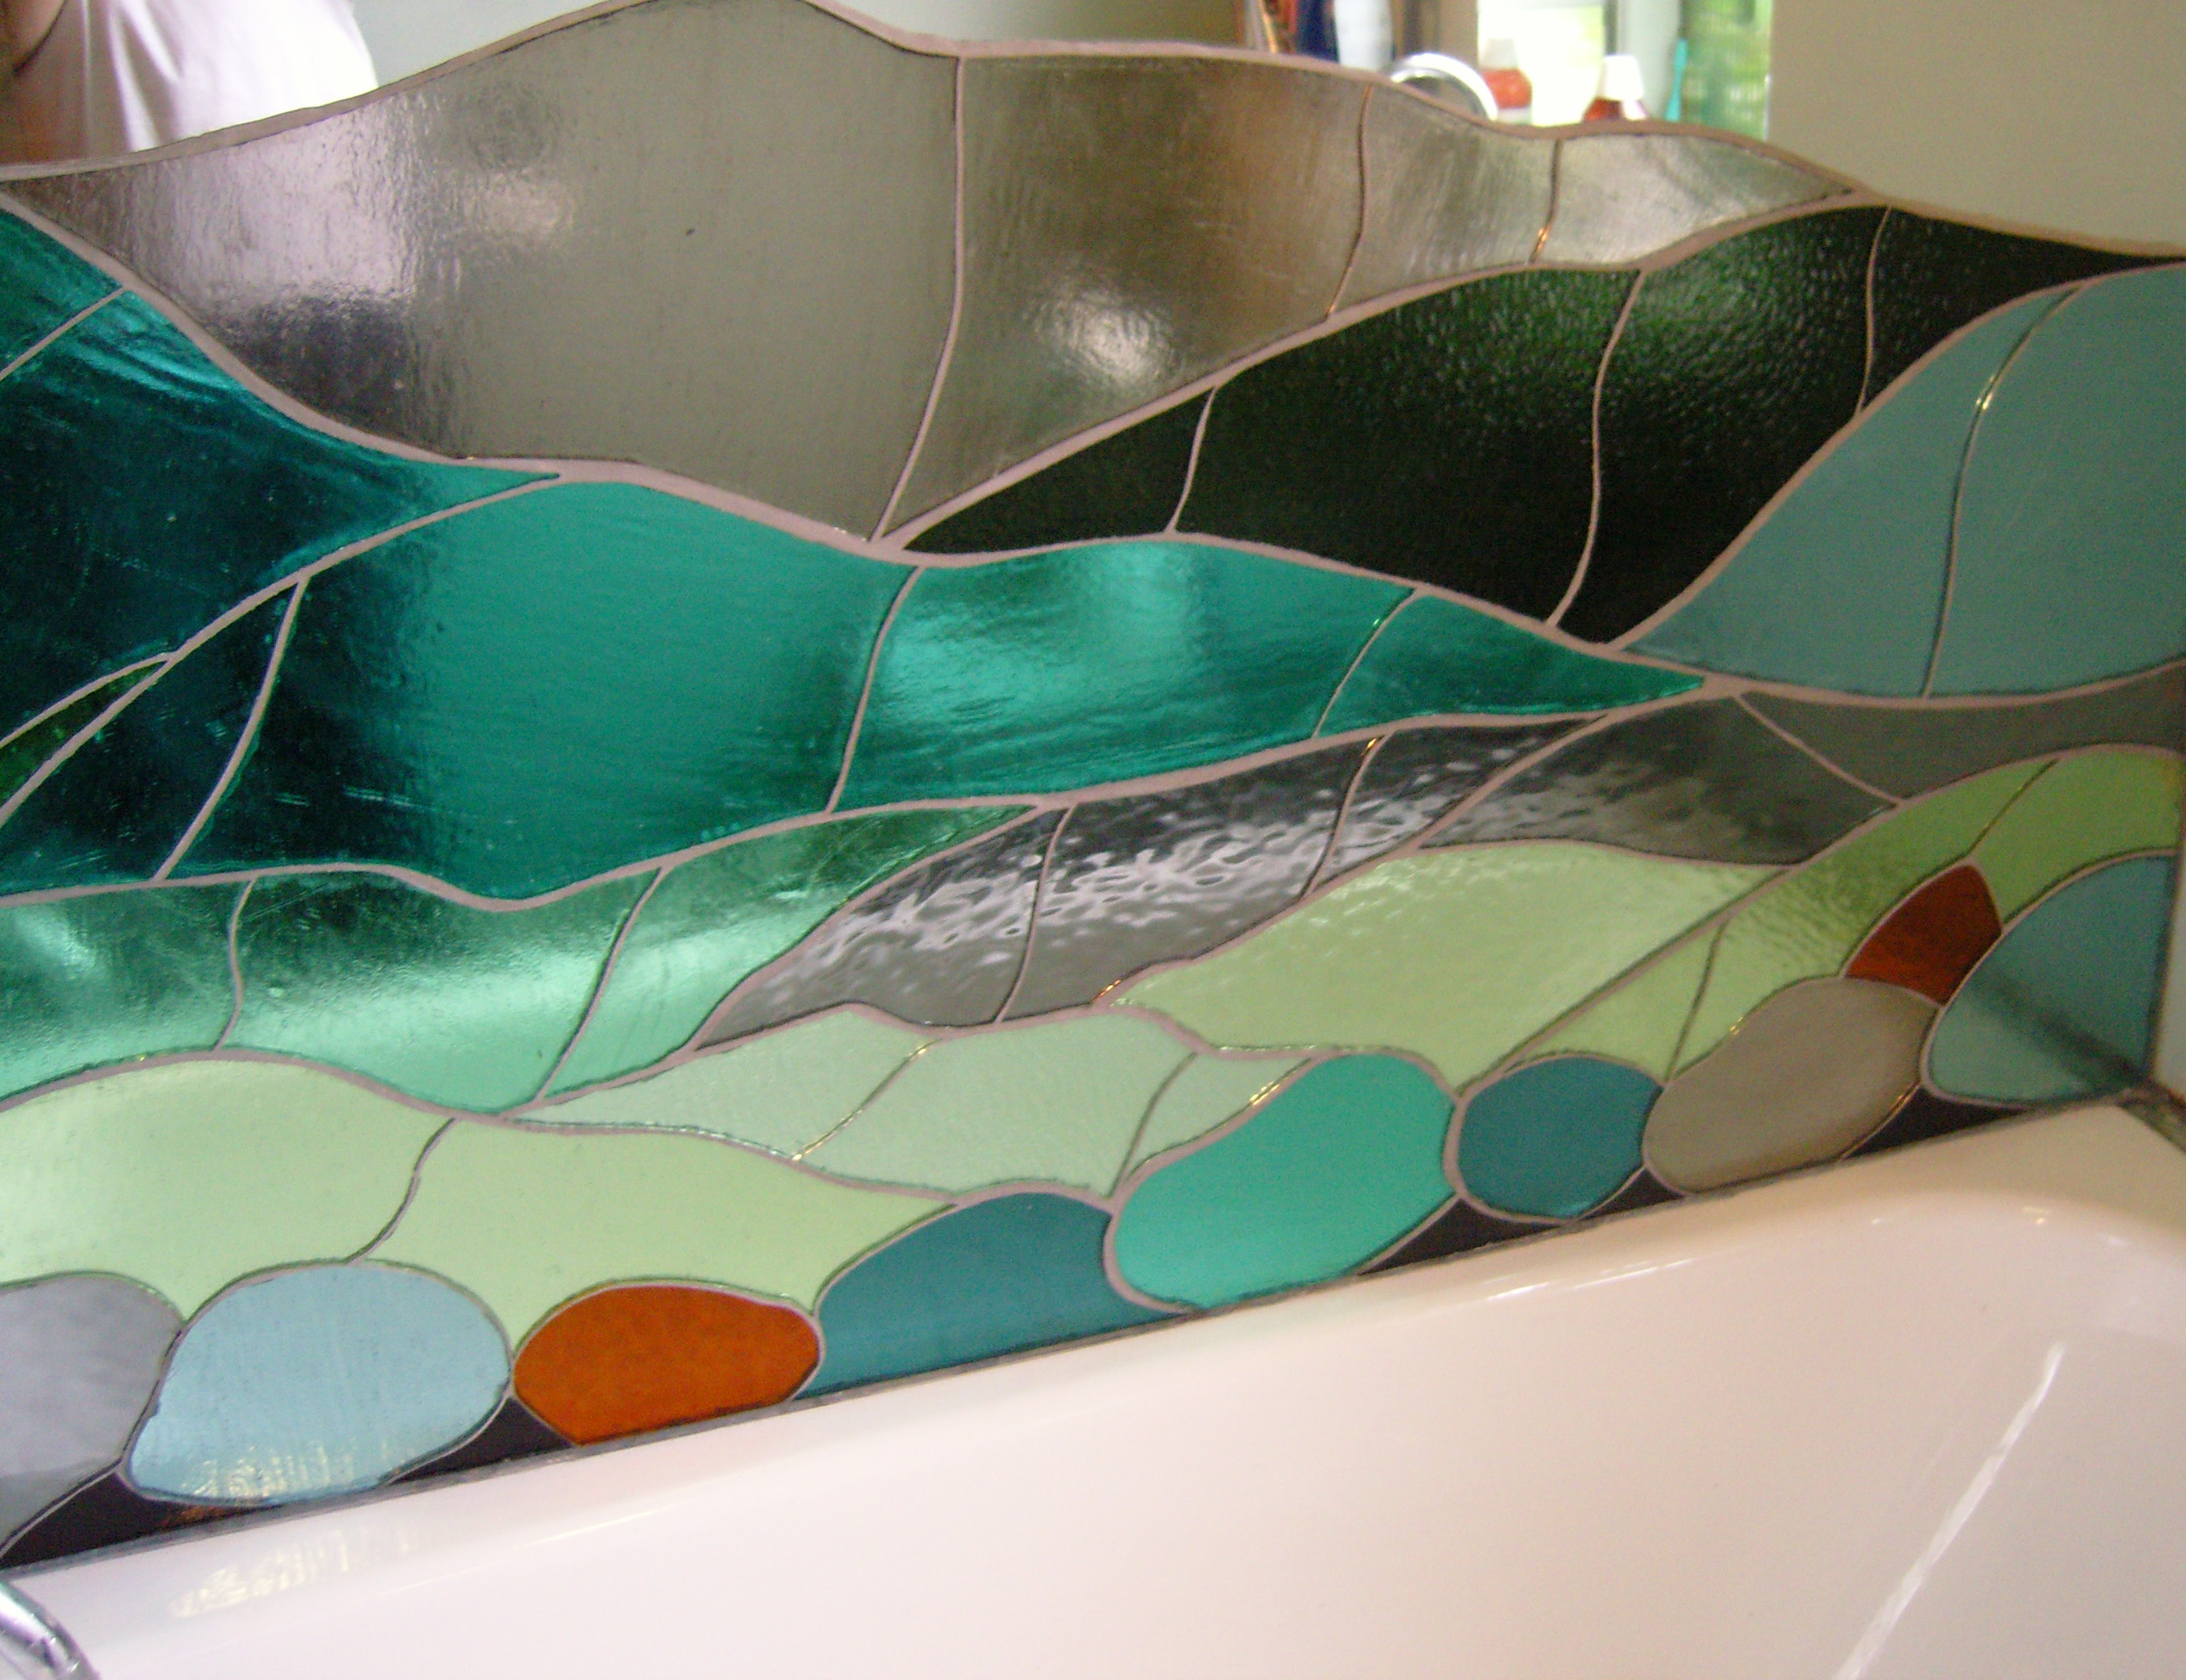 Re-vamped bathroom with 'appliqued' glass pieces